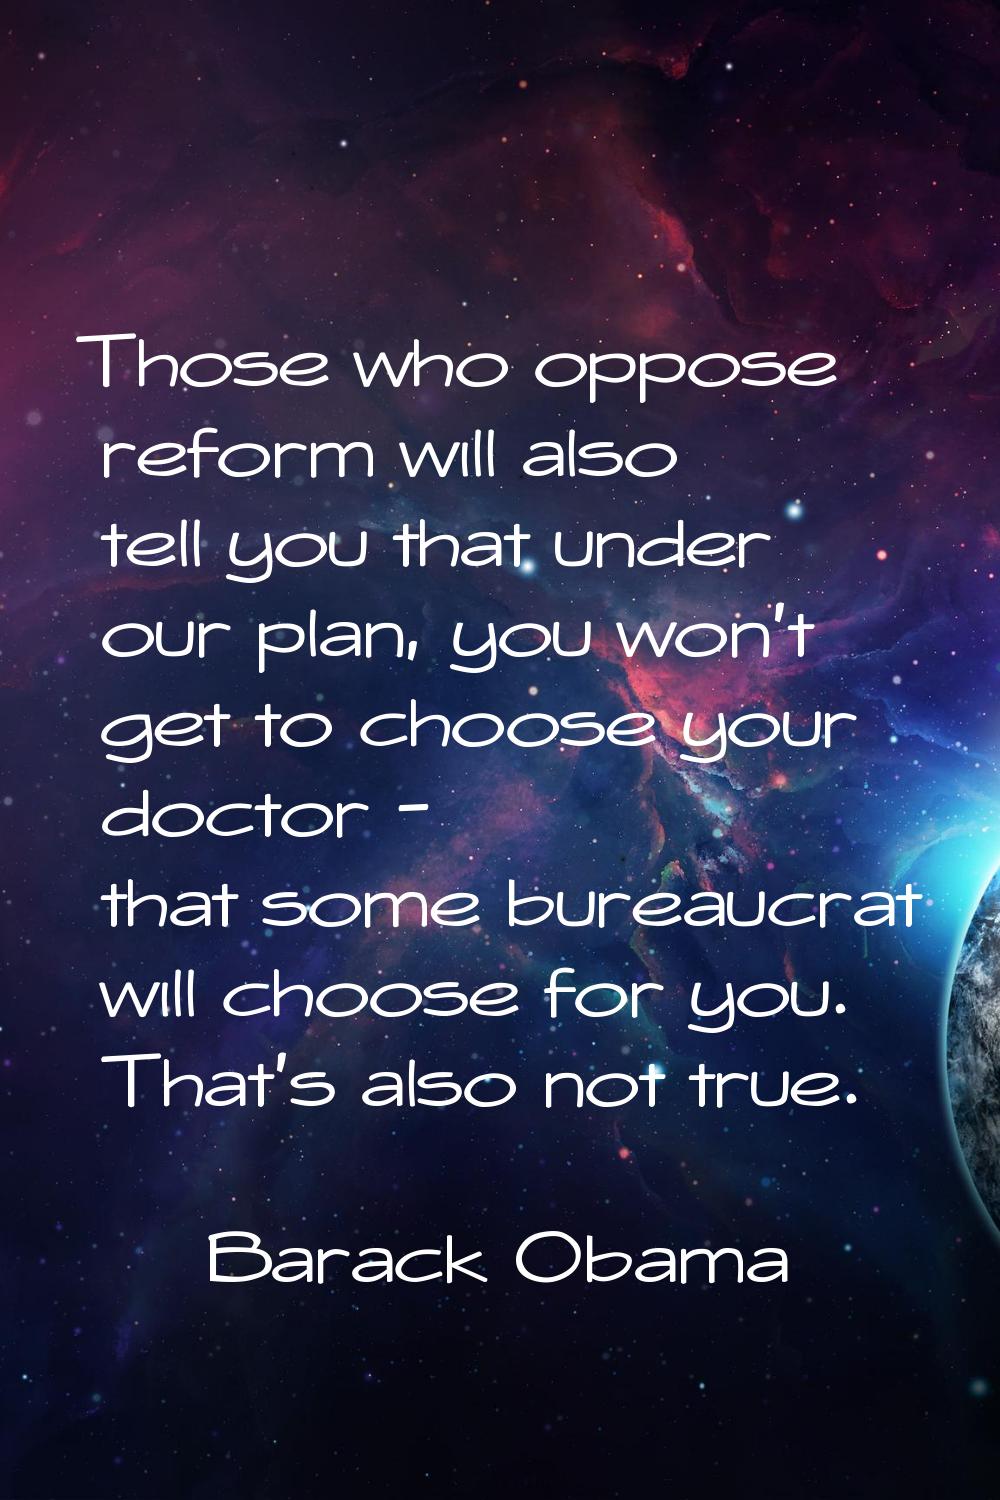 Those who oppose reform will also tell you that under our plan, you won't get to choose your doctor